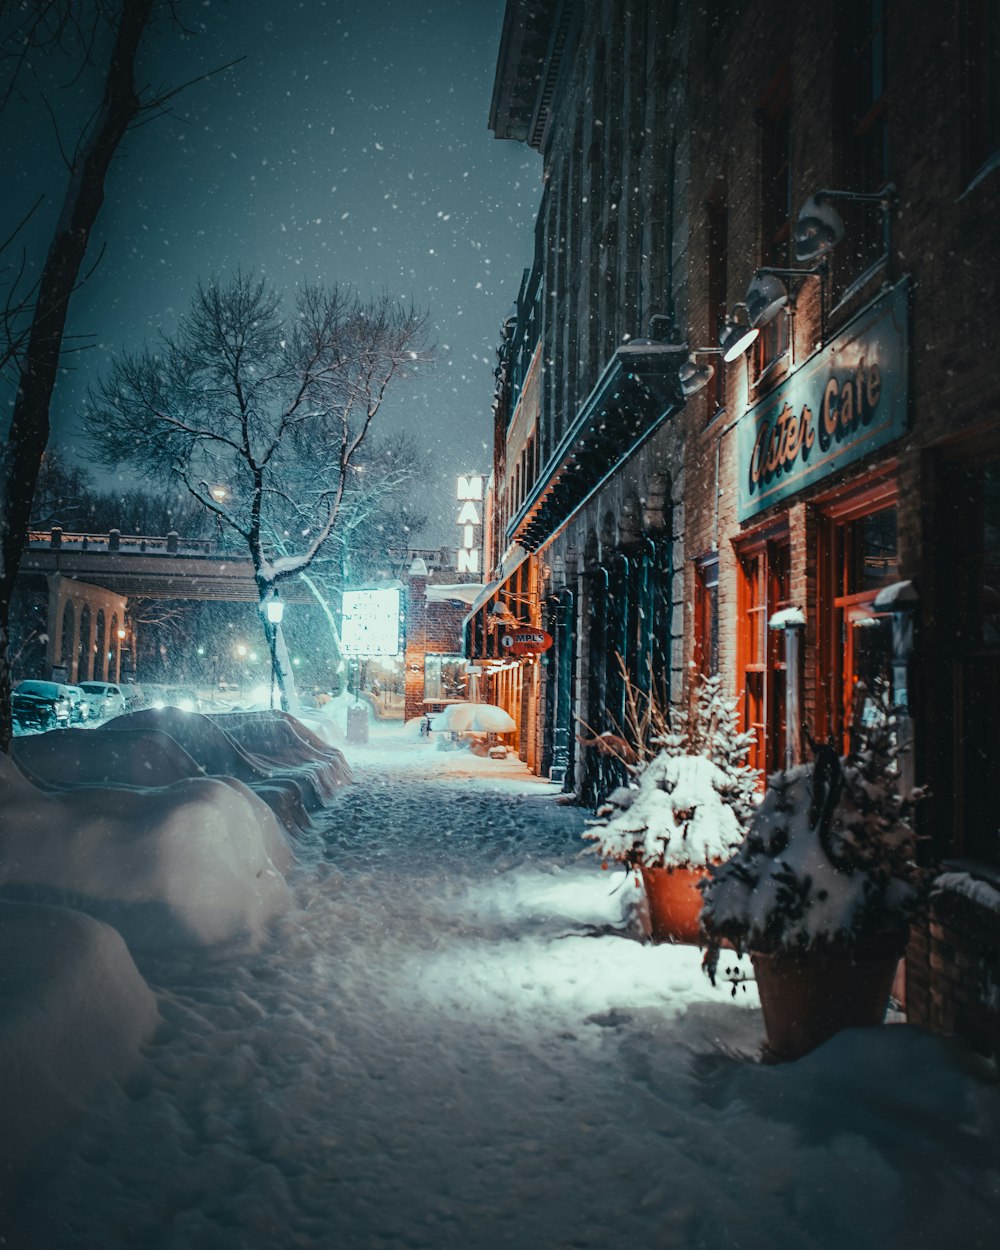 snow covered plant and road in front of cafe photo – Free Christmas Image  on Unsplash